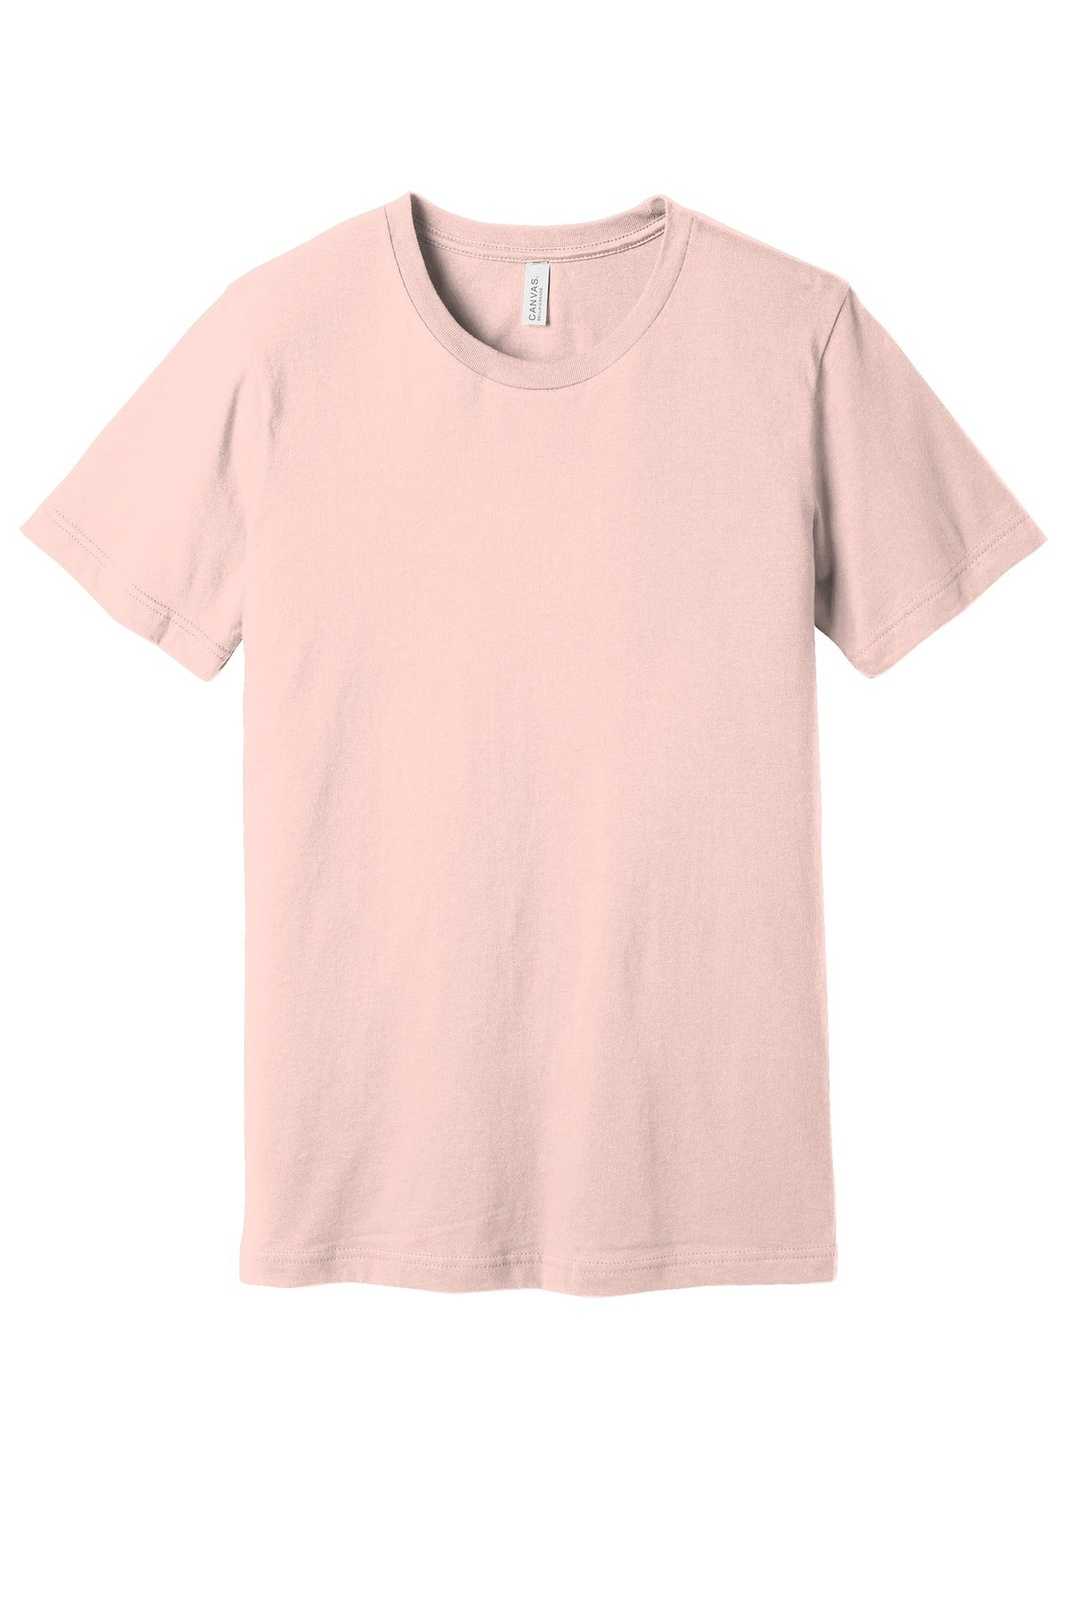 Bella + Canvas 3001 Unisex Jersey Short Sleeve Tee - Soft Pink - HIT a Double